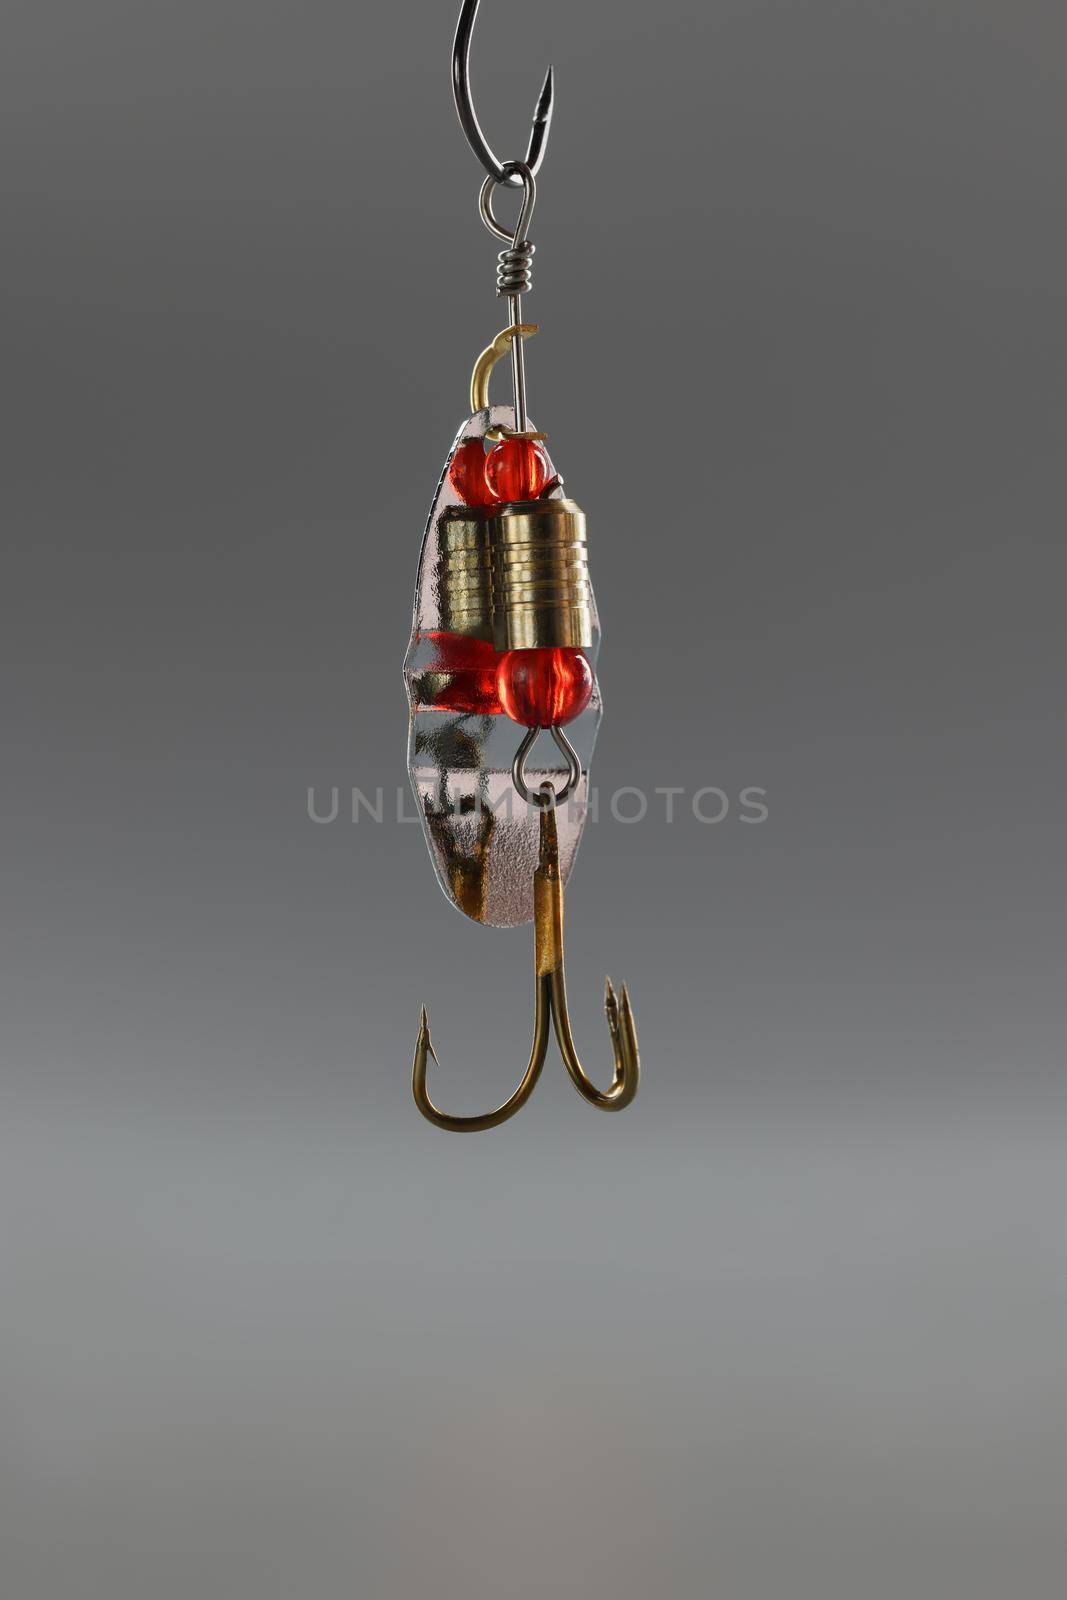 Fishing hook, sharp tip of hook, construction to catch fish in river or lake by kuprevich